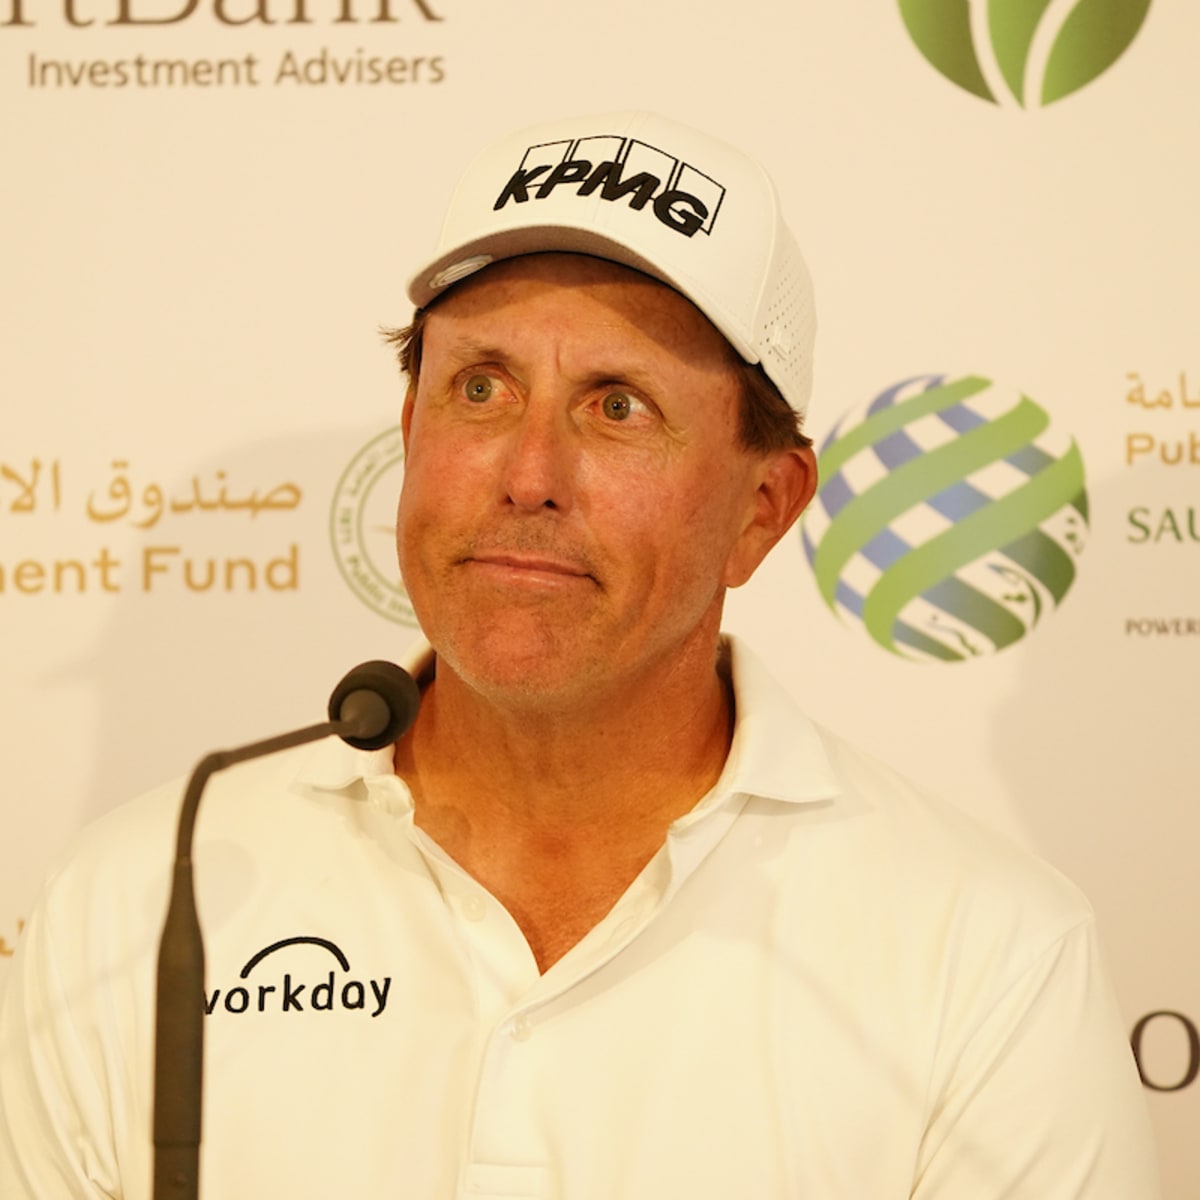 Phil Mickelson Claims Some Saudi-Related Comments Off The Record